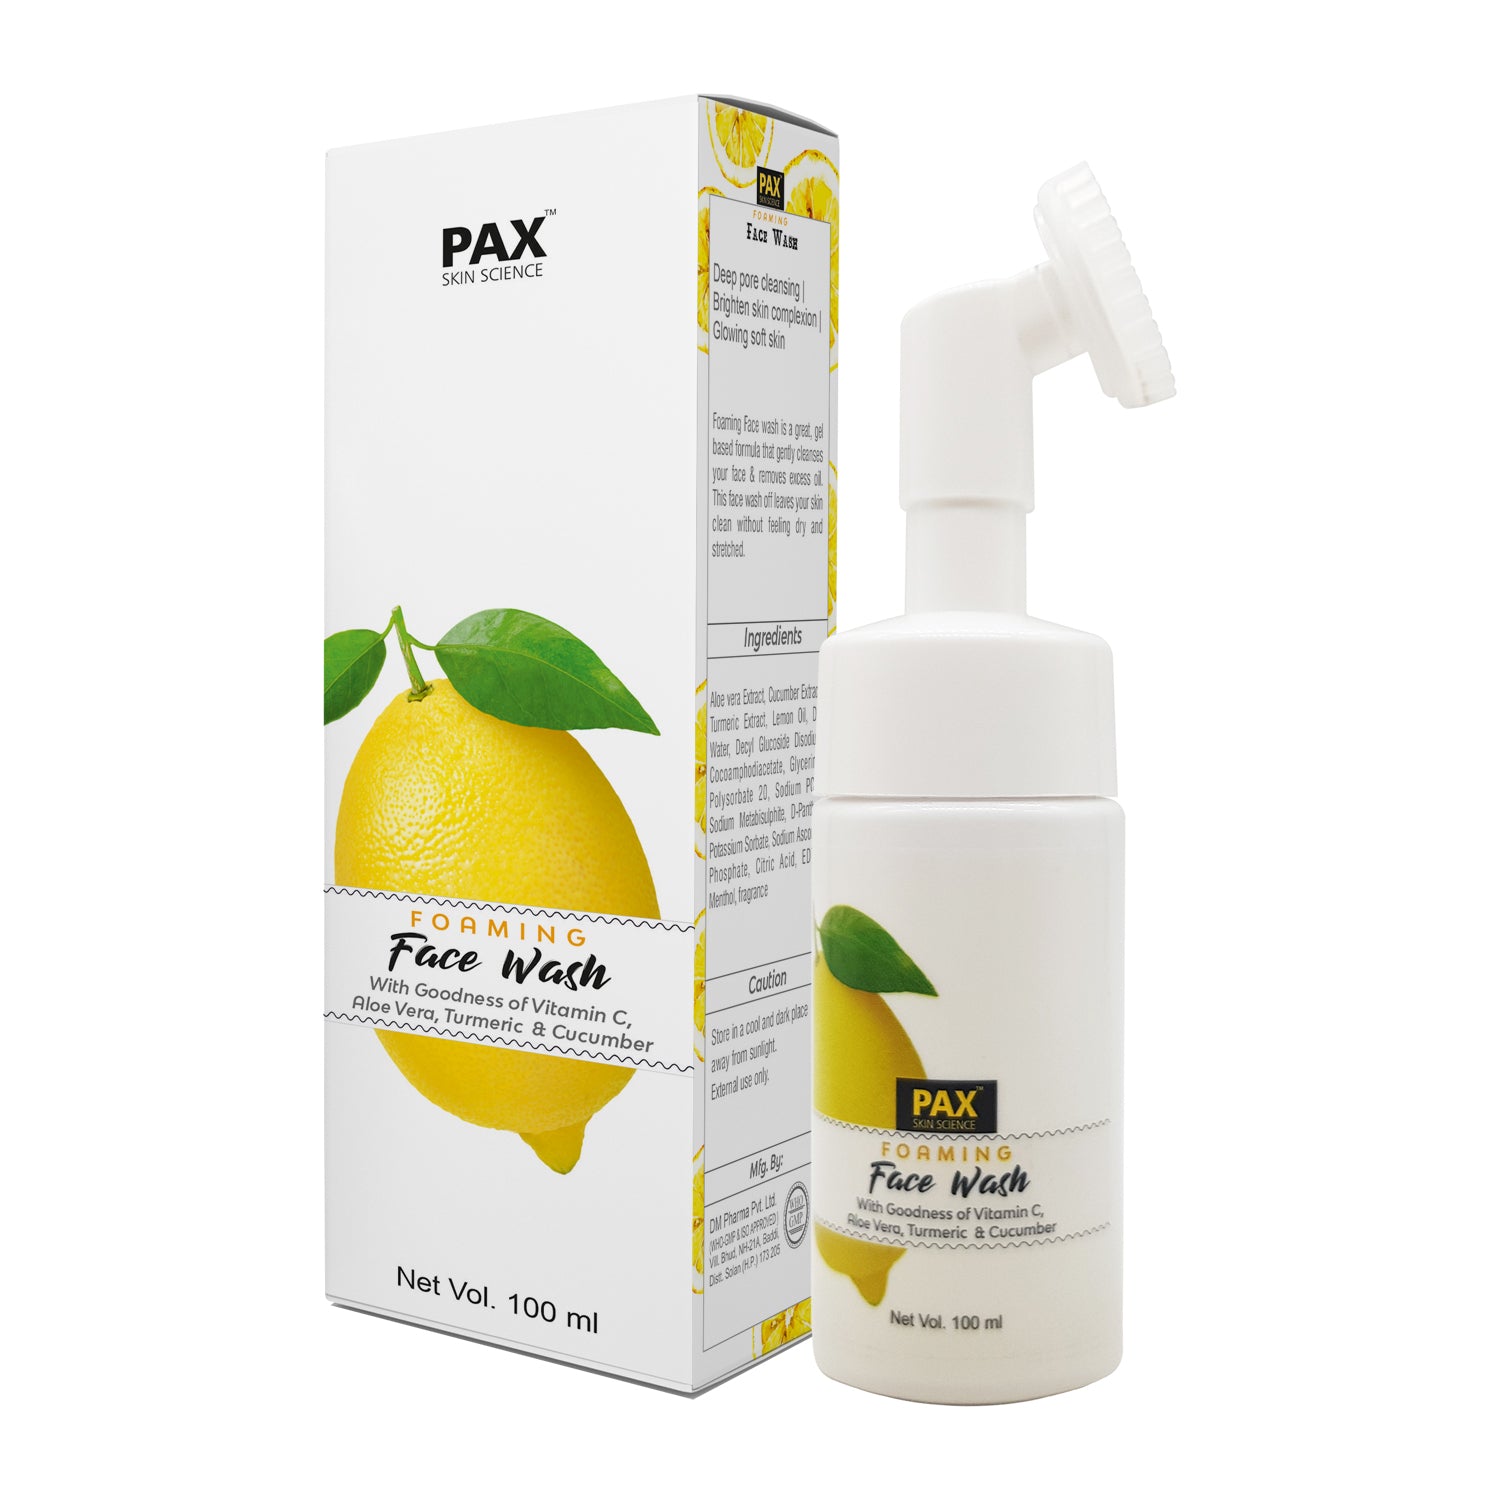 Pax Foaming Face Wash with Vitamin C, Aloe Vera, Turmeric and Cucumber for Deep Cleansing - 100 ml ( BUY 1 GET 1 FREE )